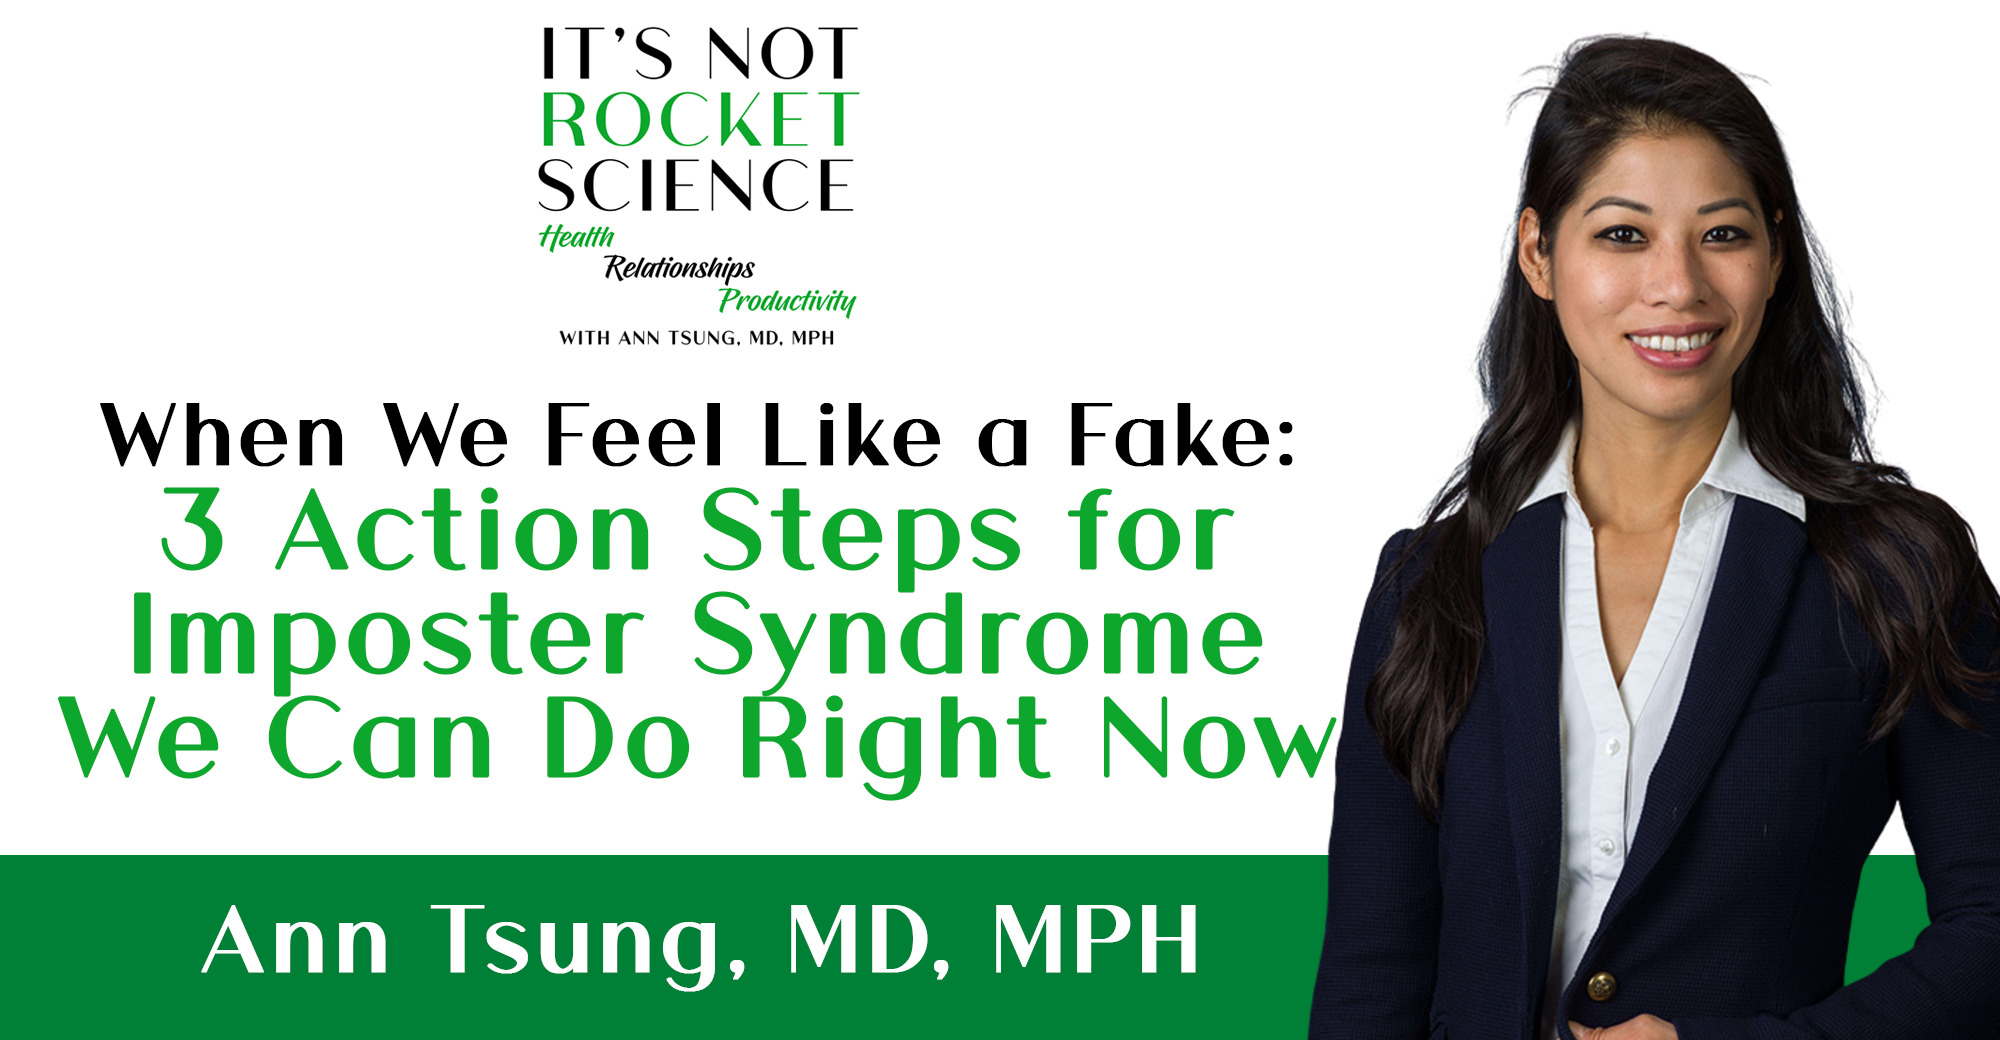 002 – Feeling Like a Fake – 3 Action Steps for Imposter Syndrome We Can Do Right Now